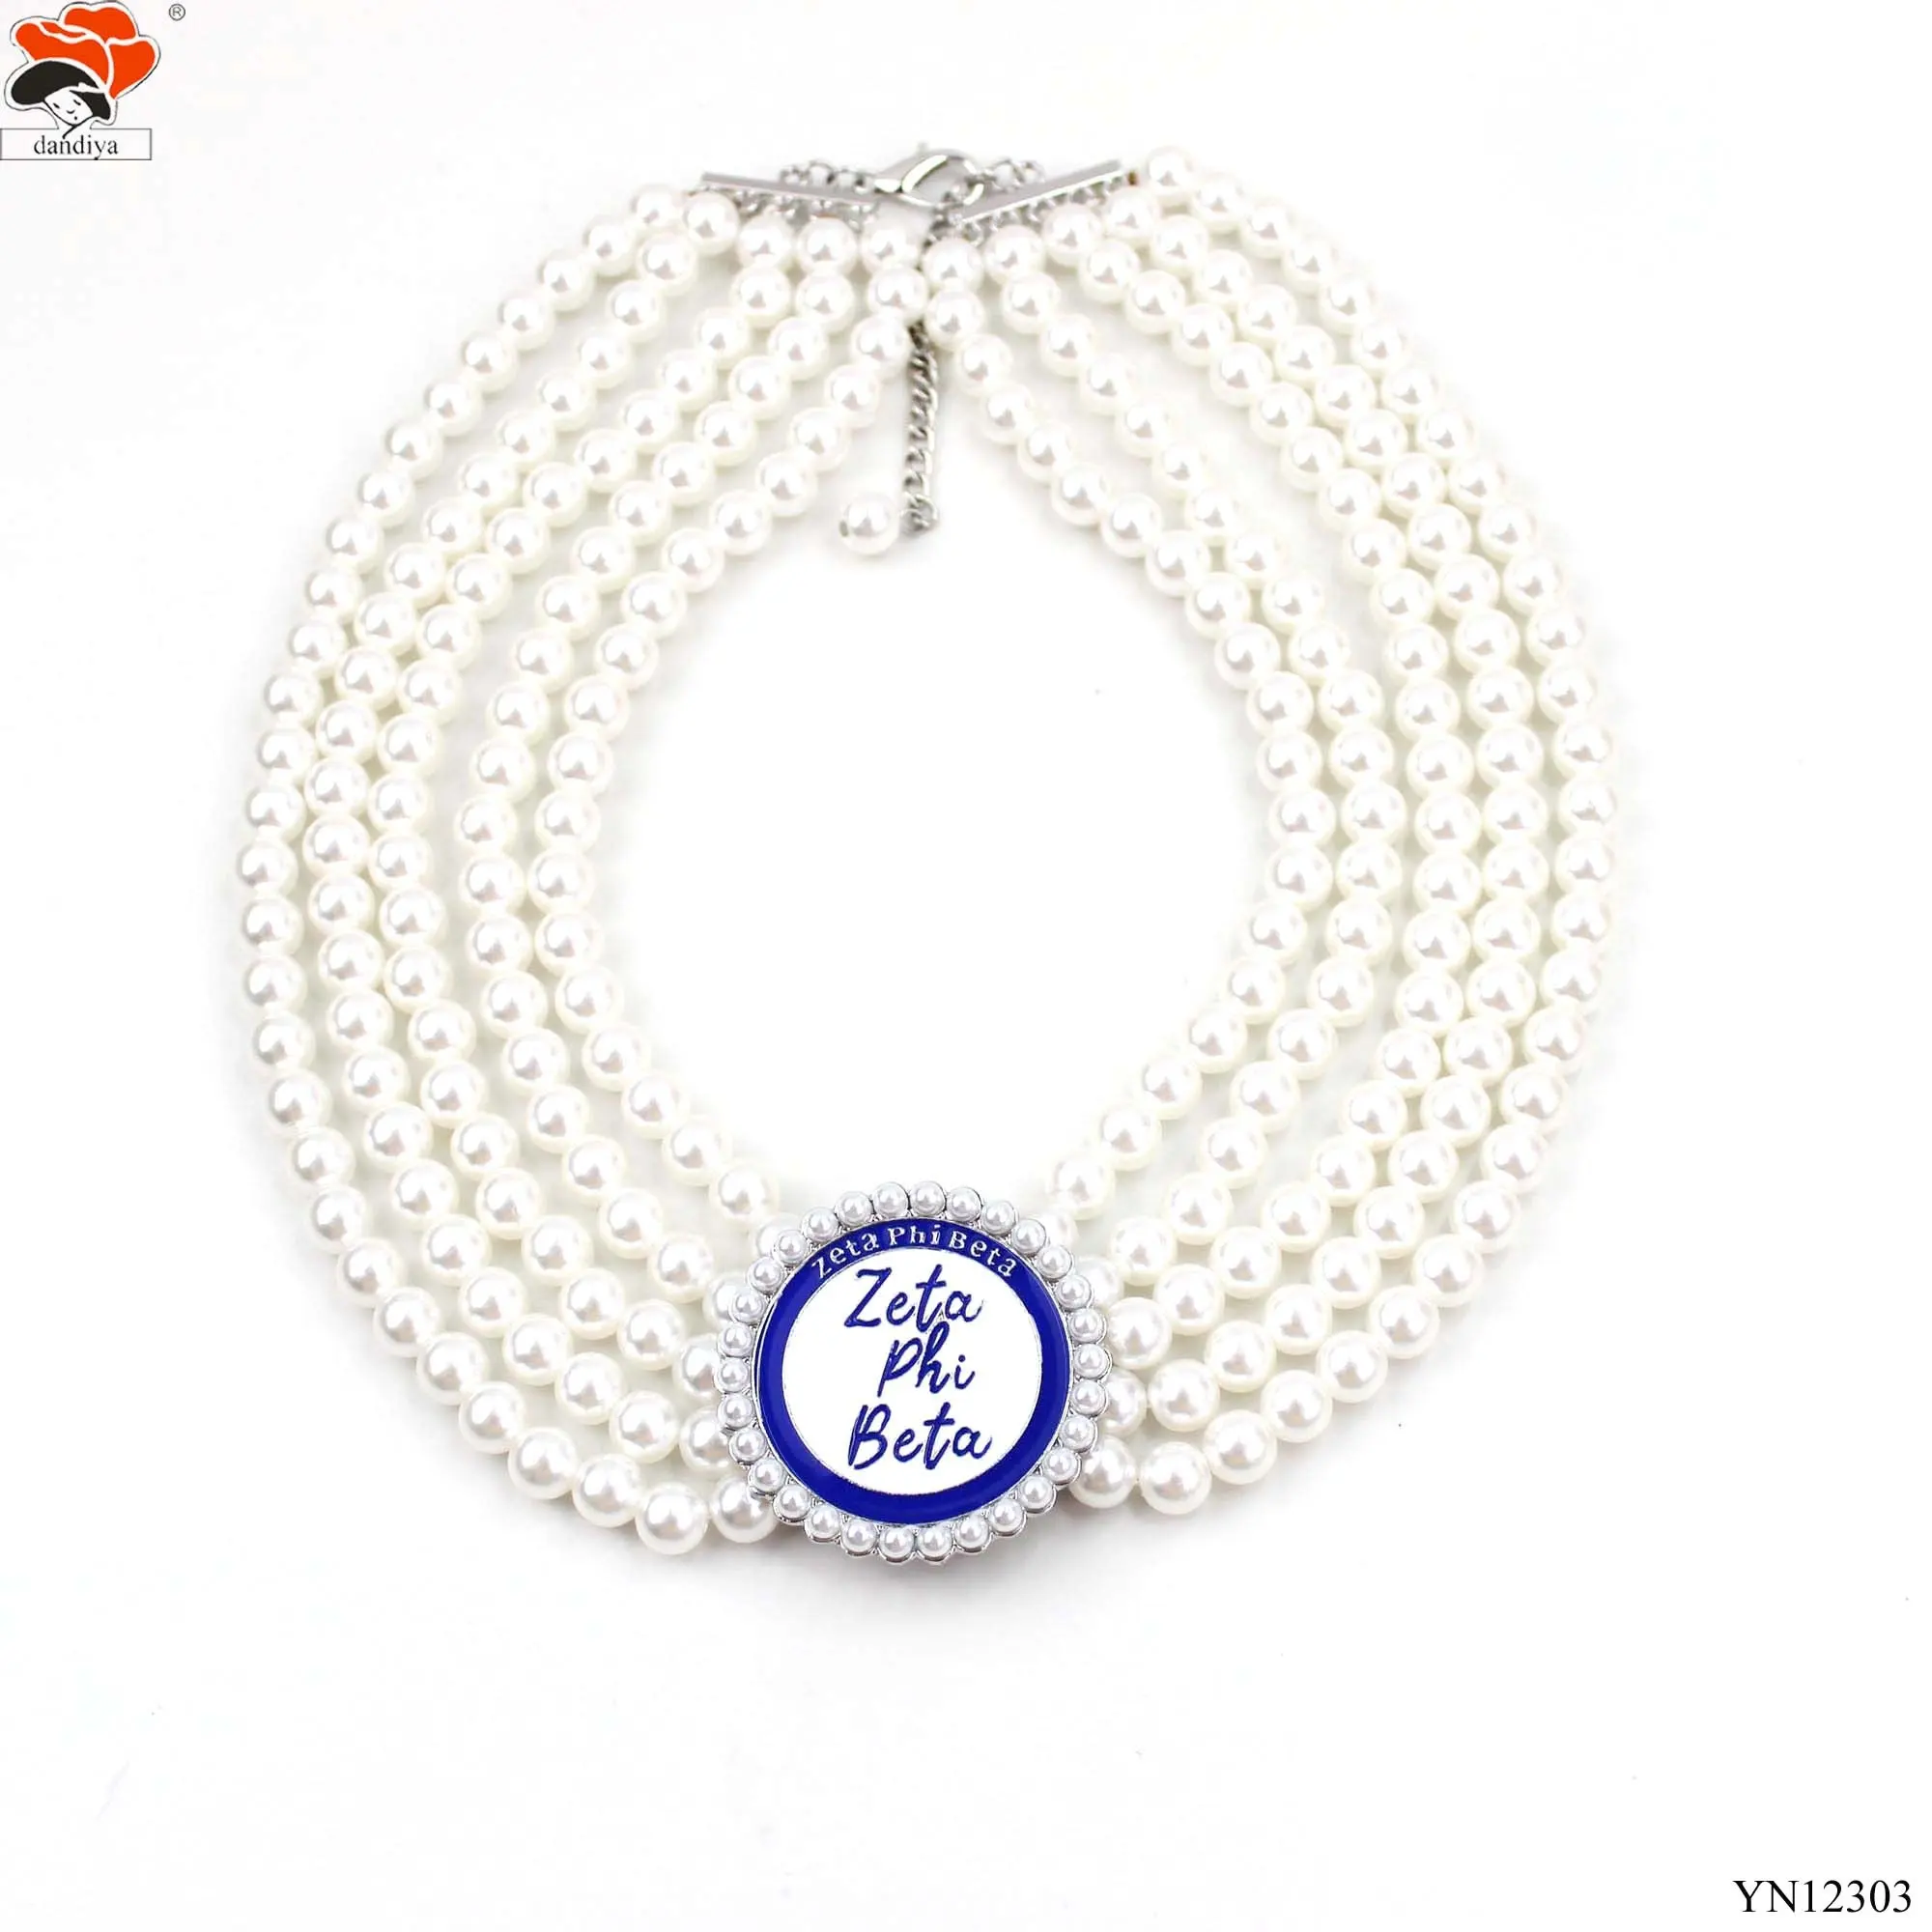 Zeta phi Beta charm FIVE strand ABS pearls NECKLACE Greek Sorority &Fraternity products Jewelry CEP XHO